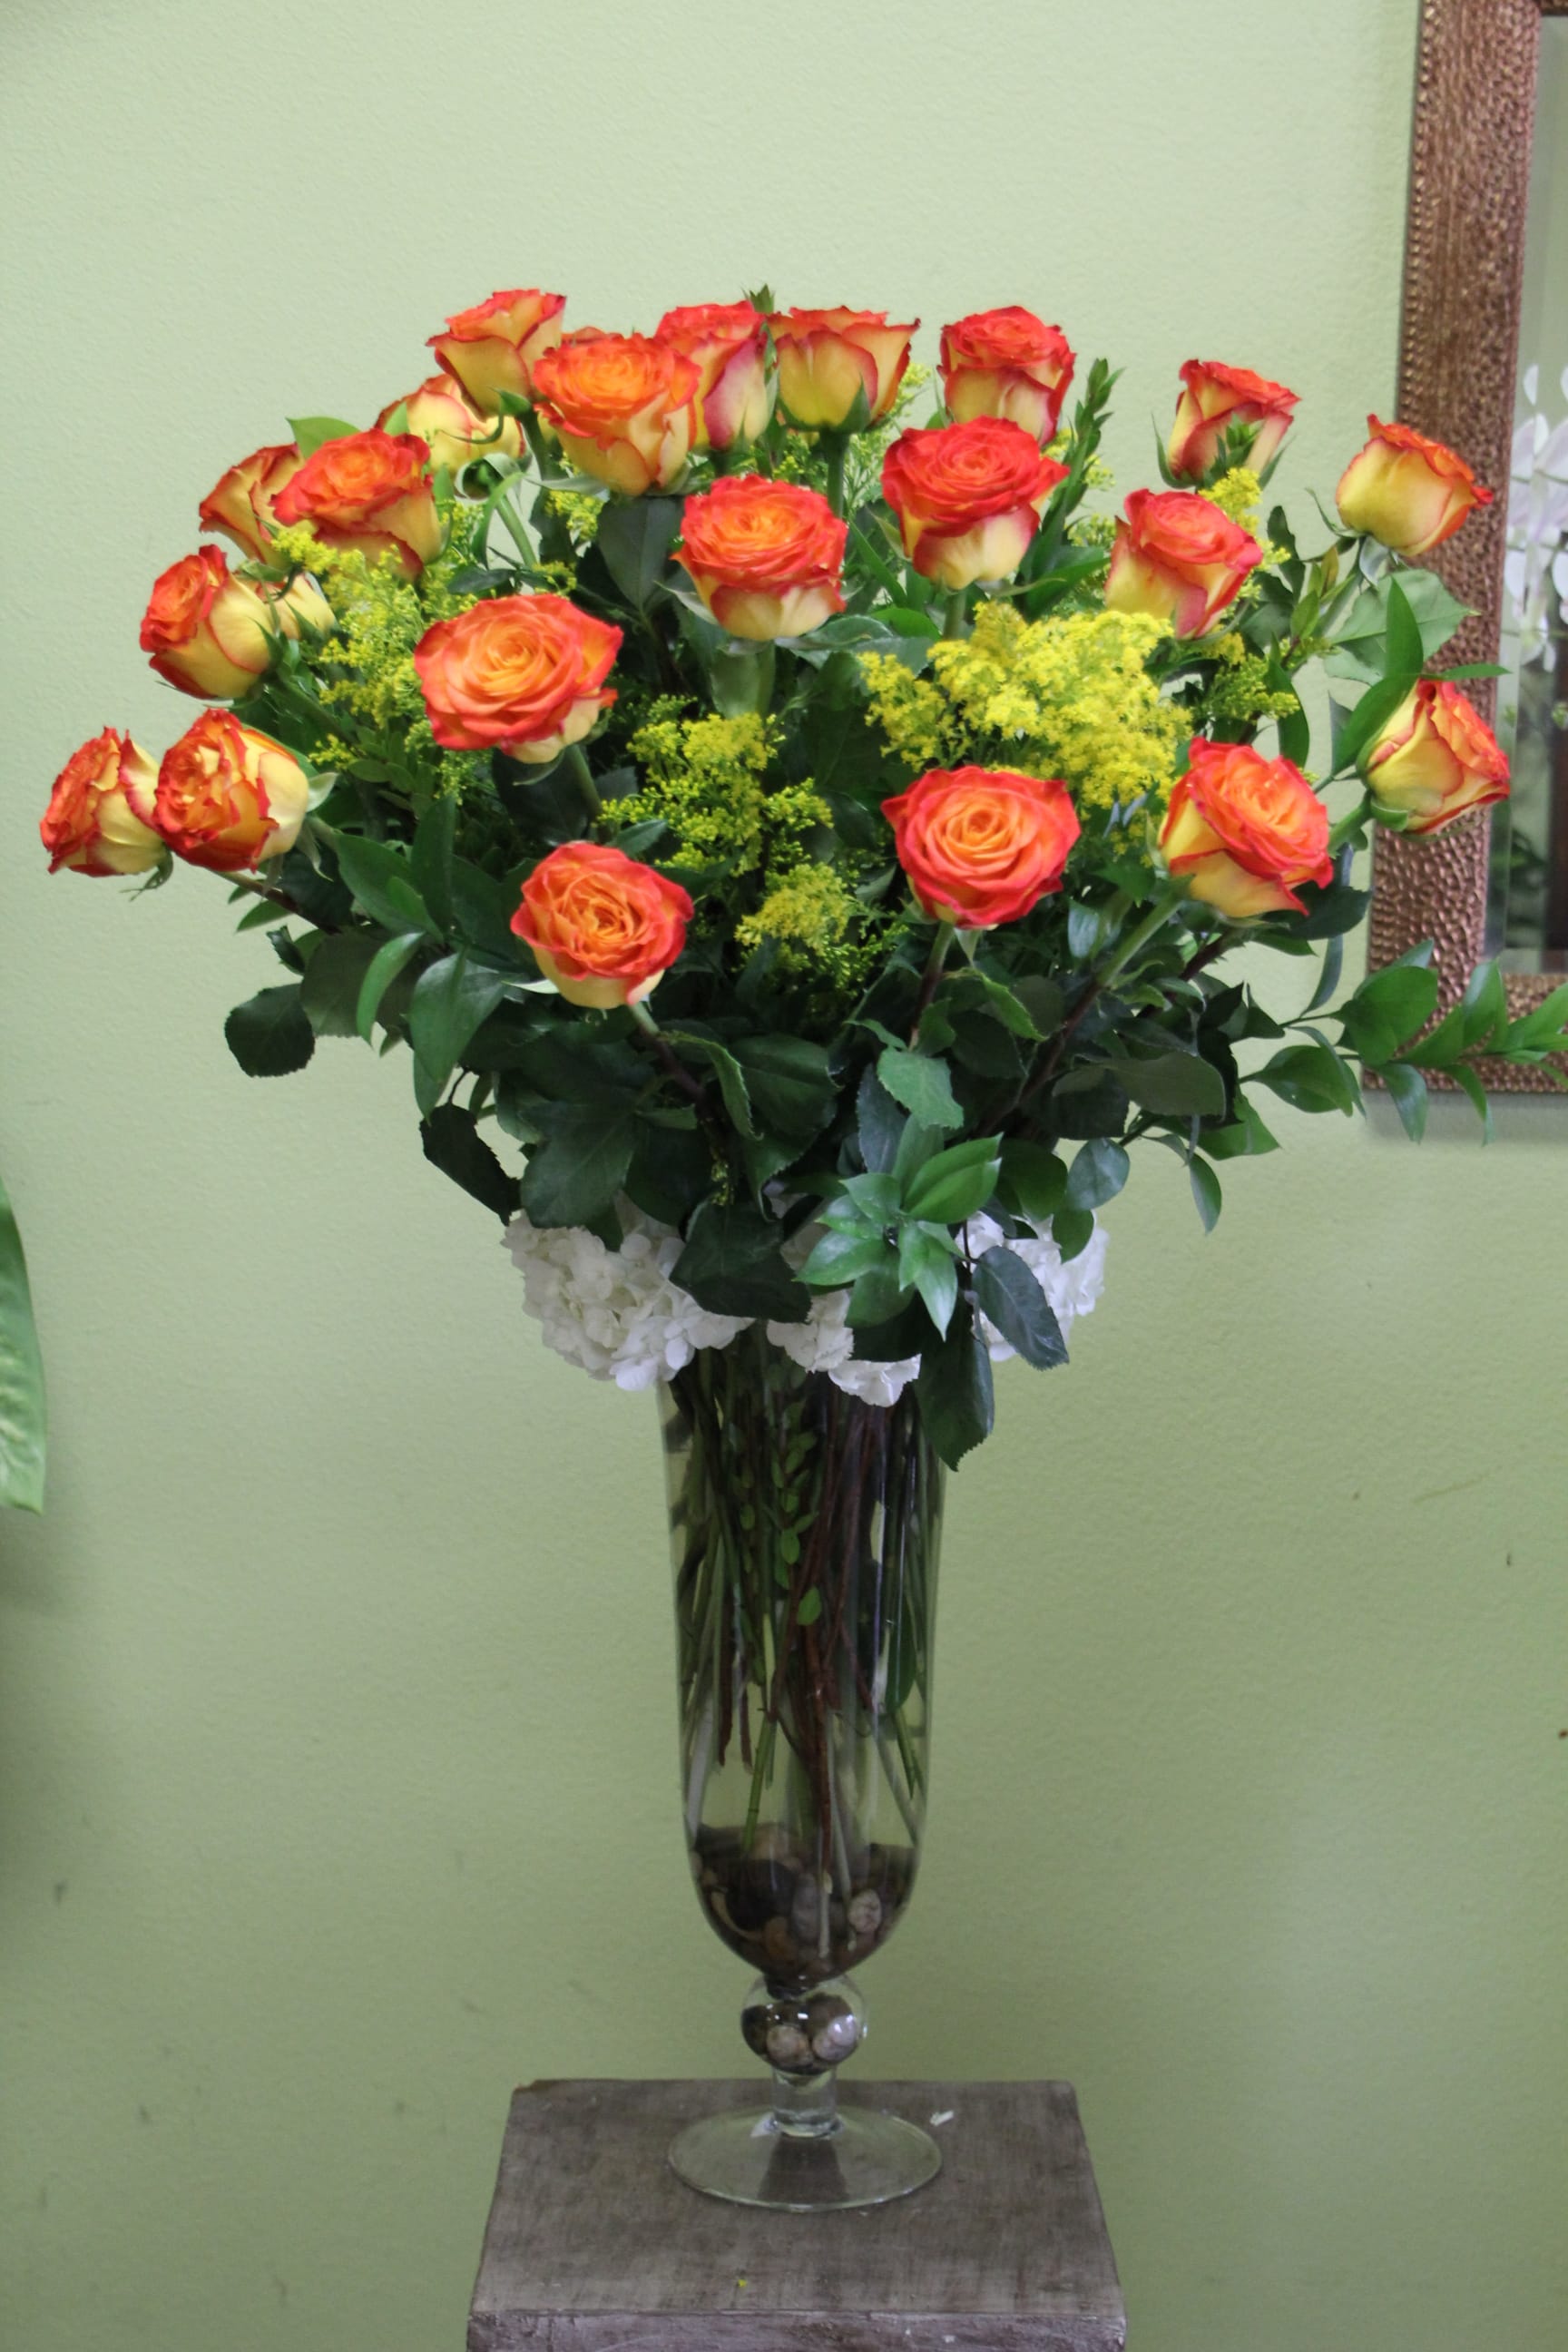 Two dozen long stem High Magic Two-Toned Yellow n' Orange Roses - These High Magic Roses are among the most unique in the two-toned family. And with this elegant crystal vase and stones placed inside, this arrangement is sure to leave a lasting impression. 